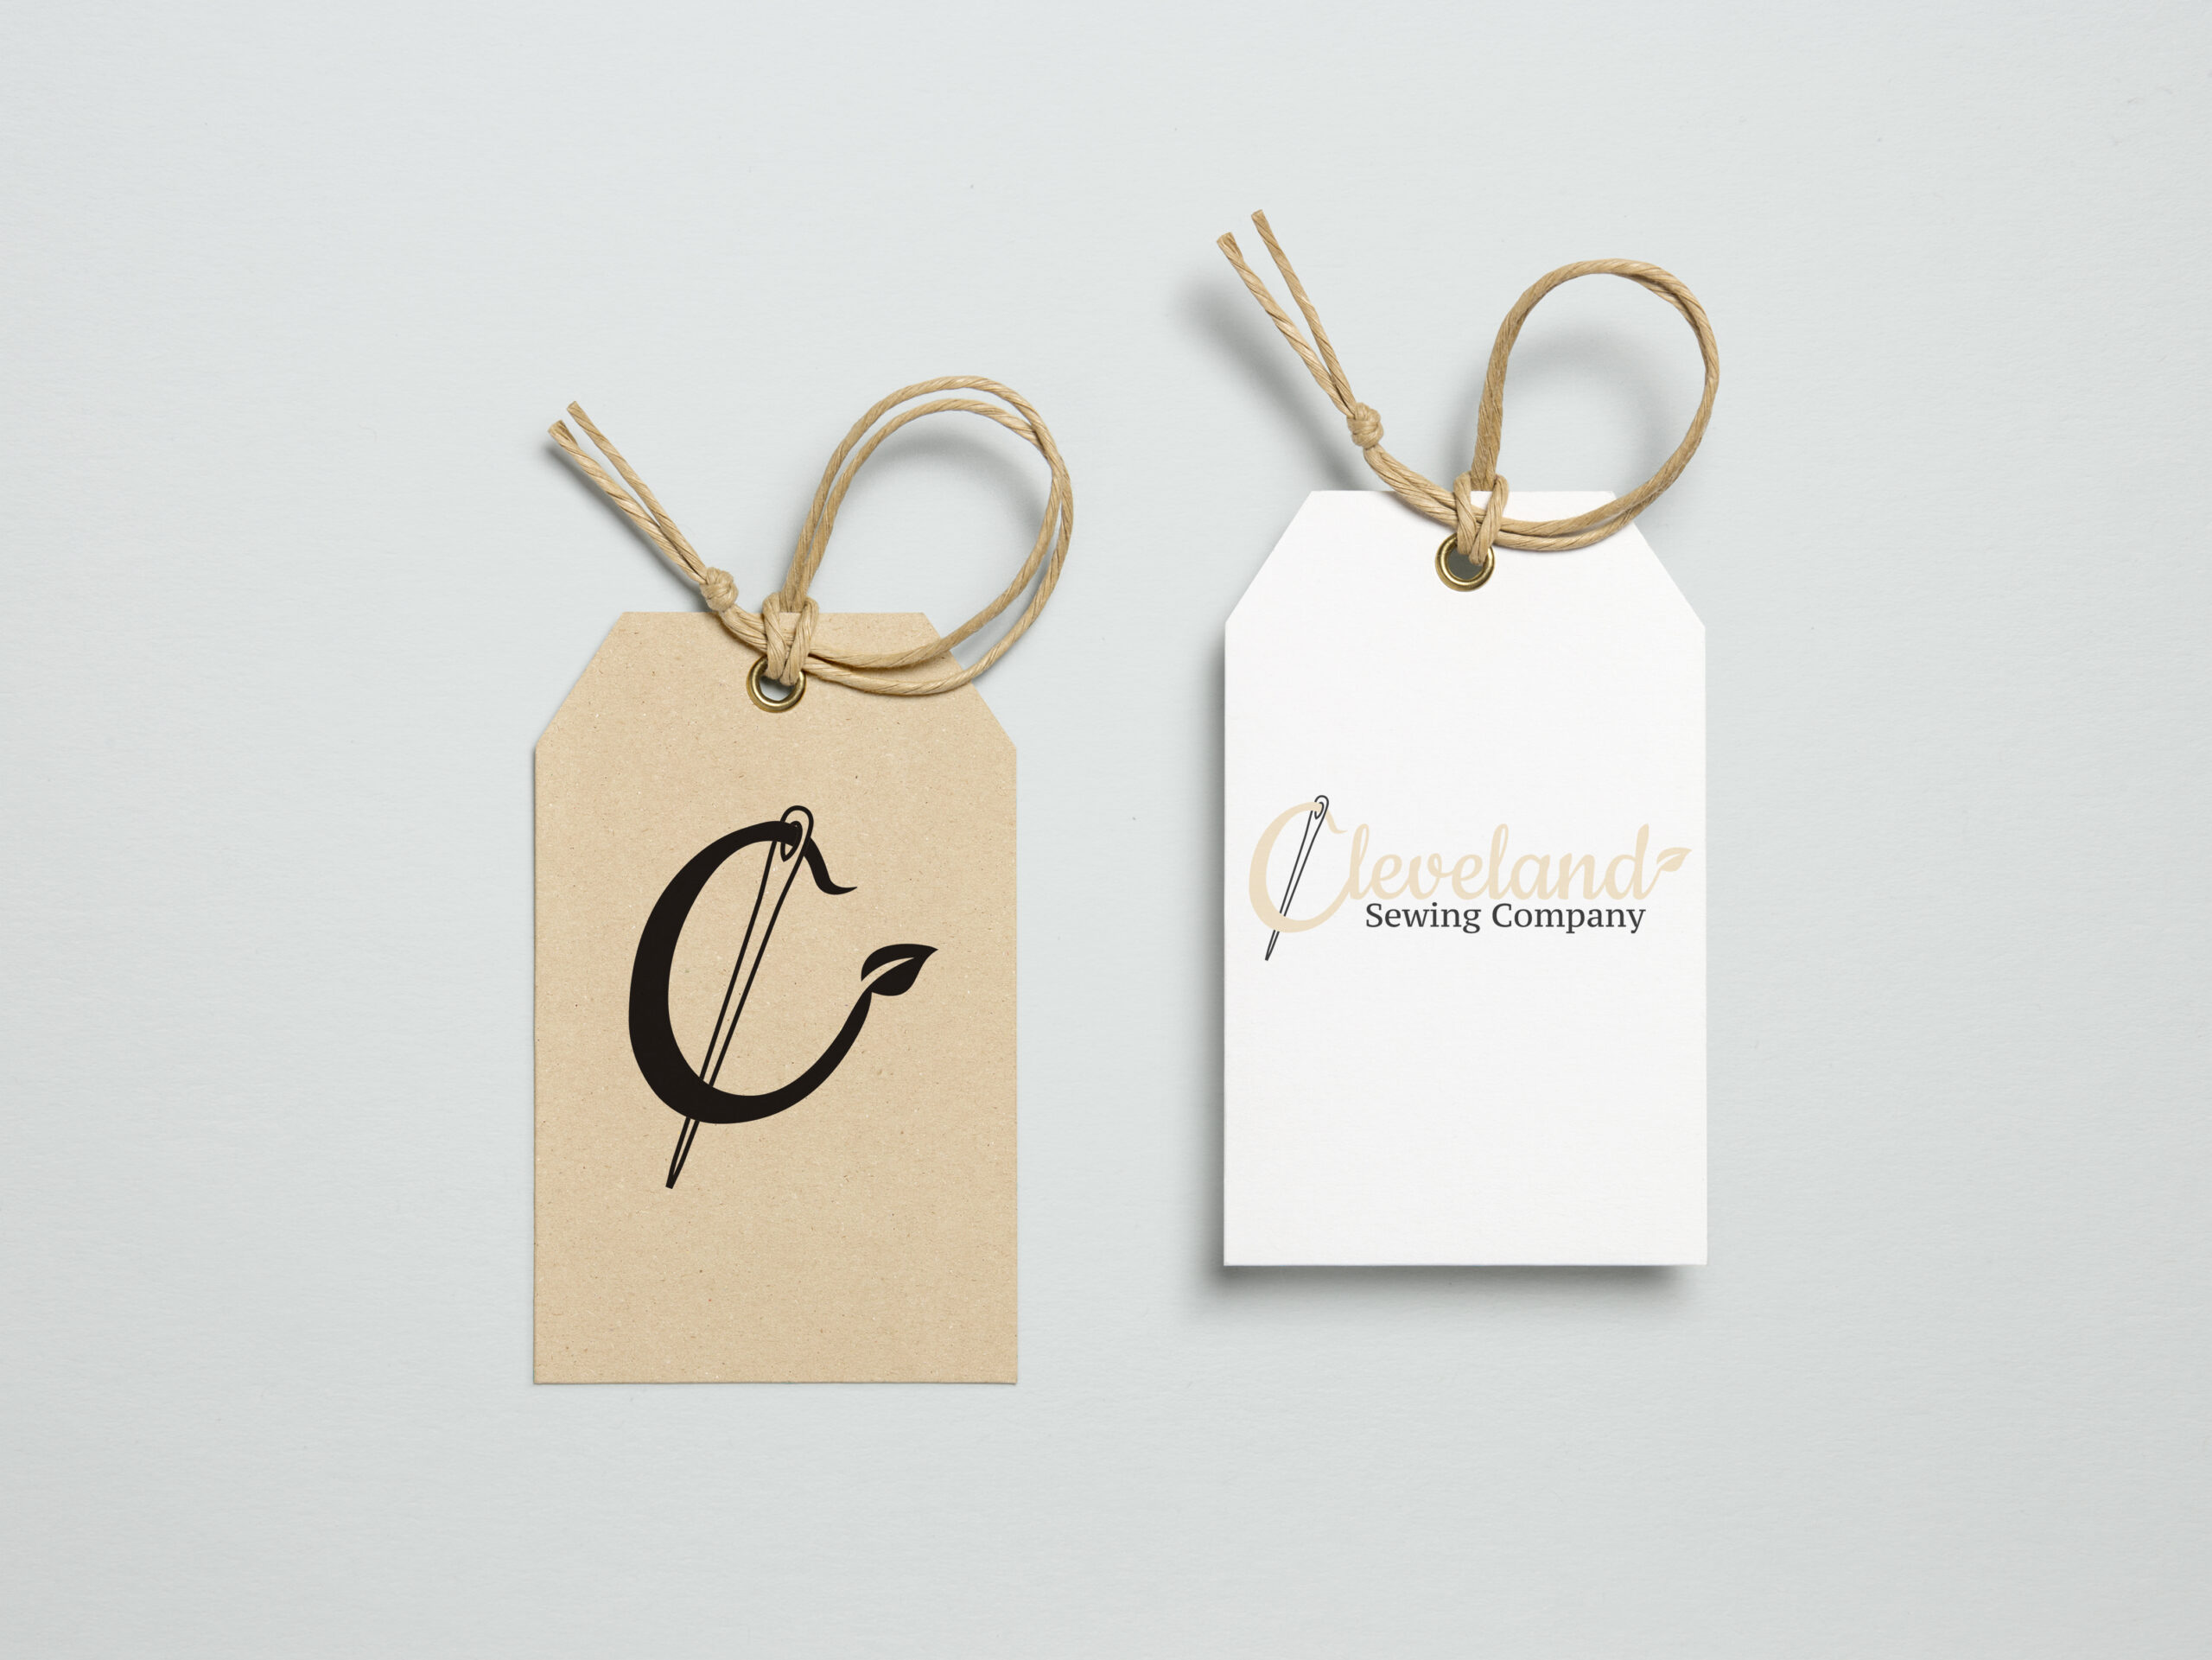 Cleveland Sewing Company Logo on Merchandise Tags